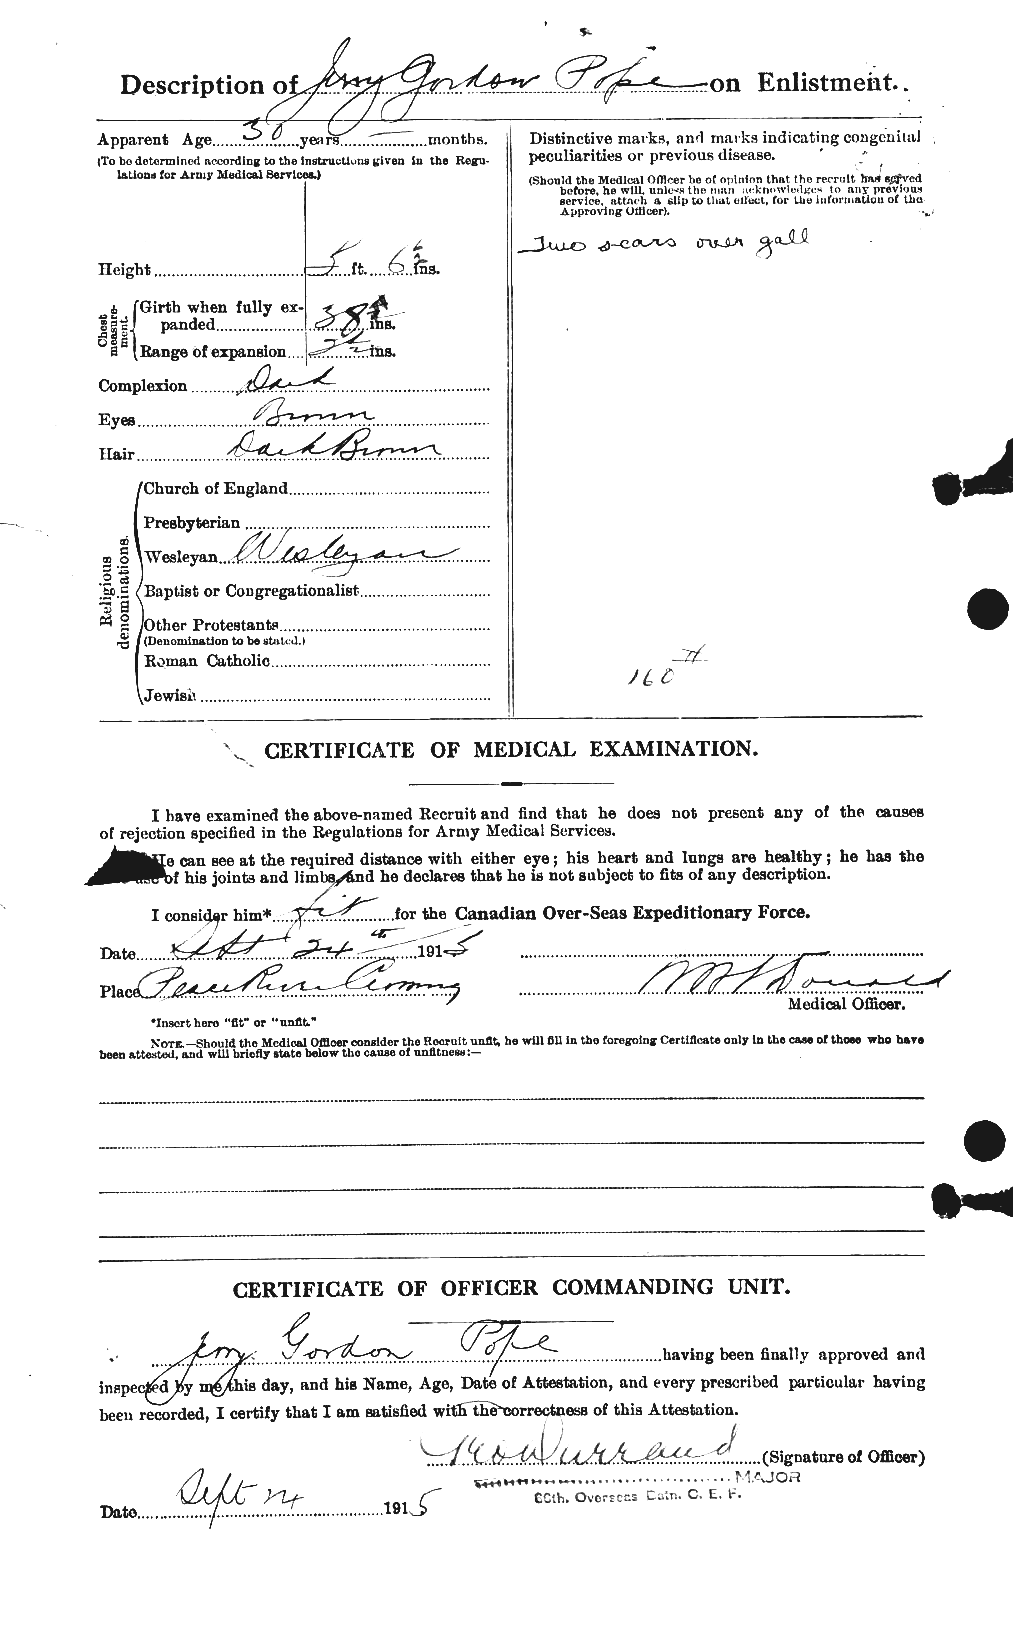 Personnel Records of the First World War - CEF 581496b